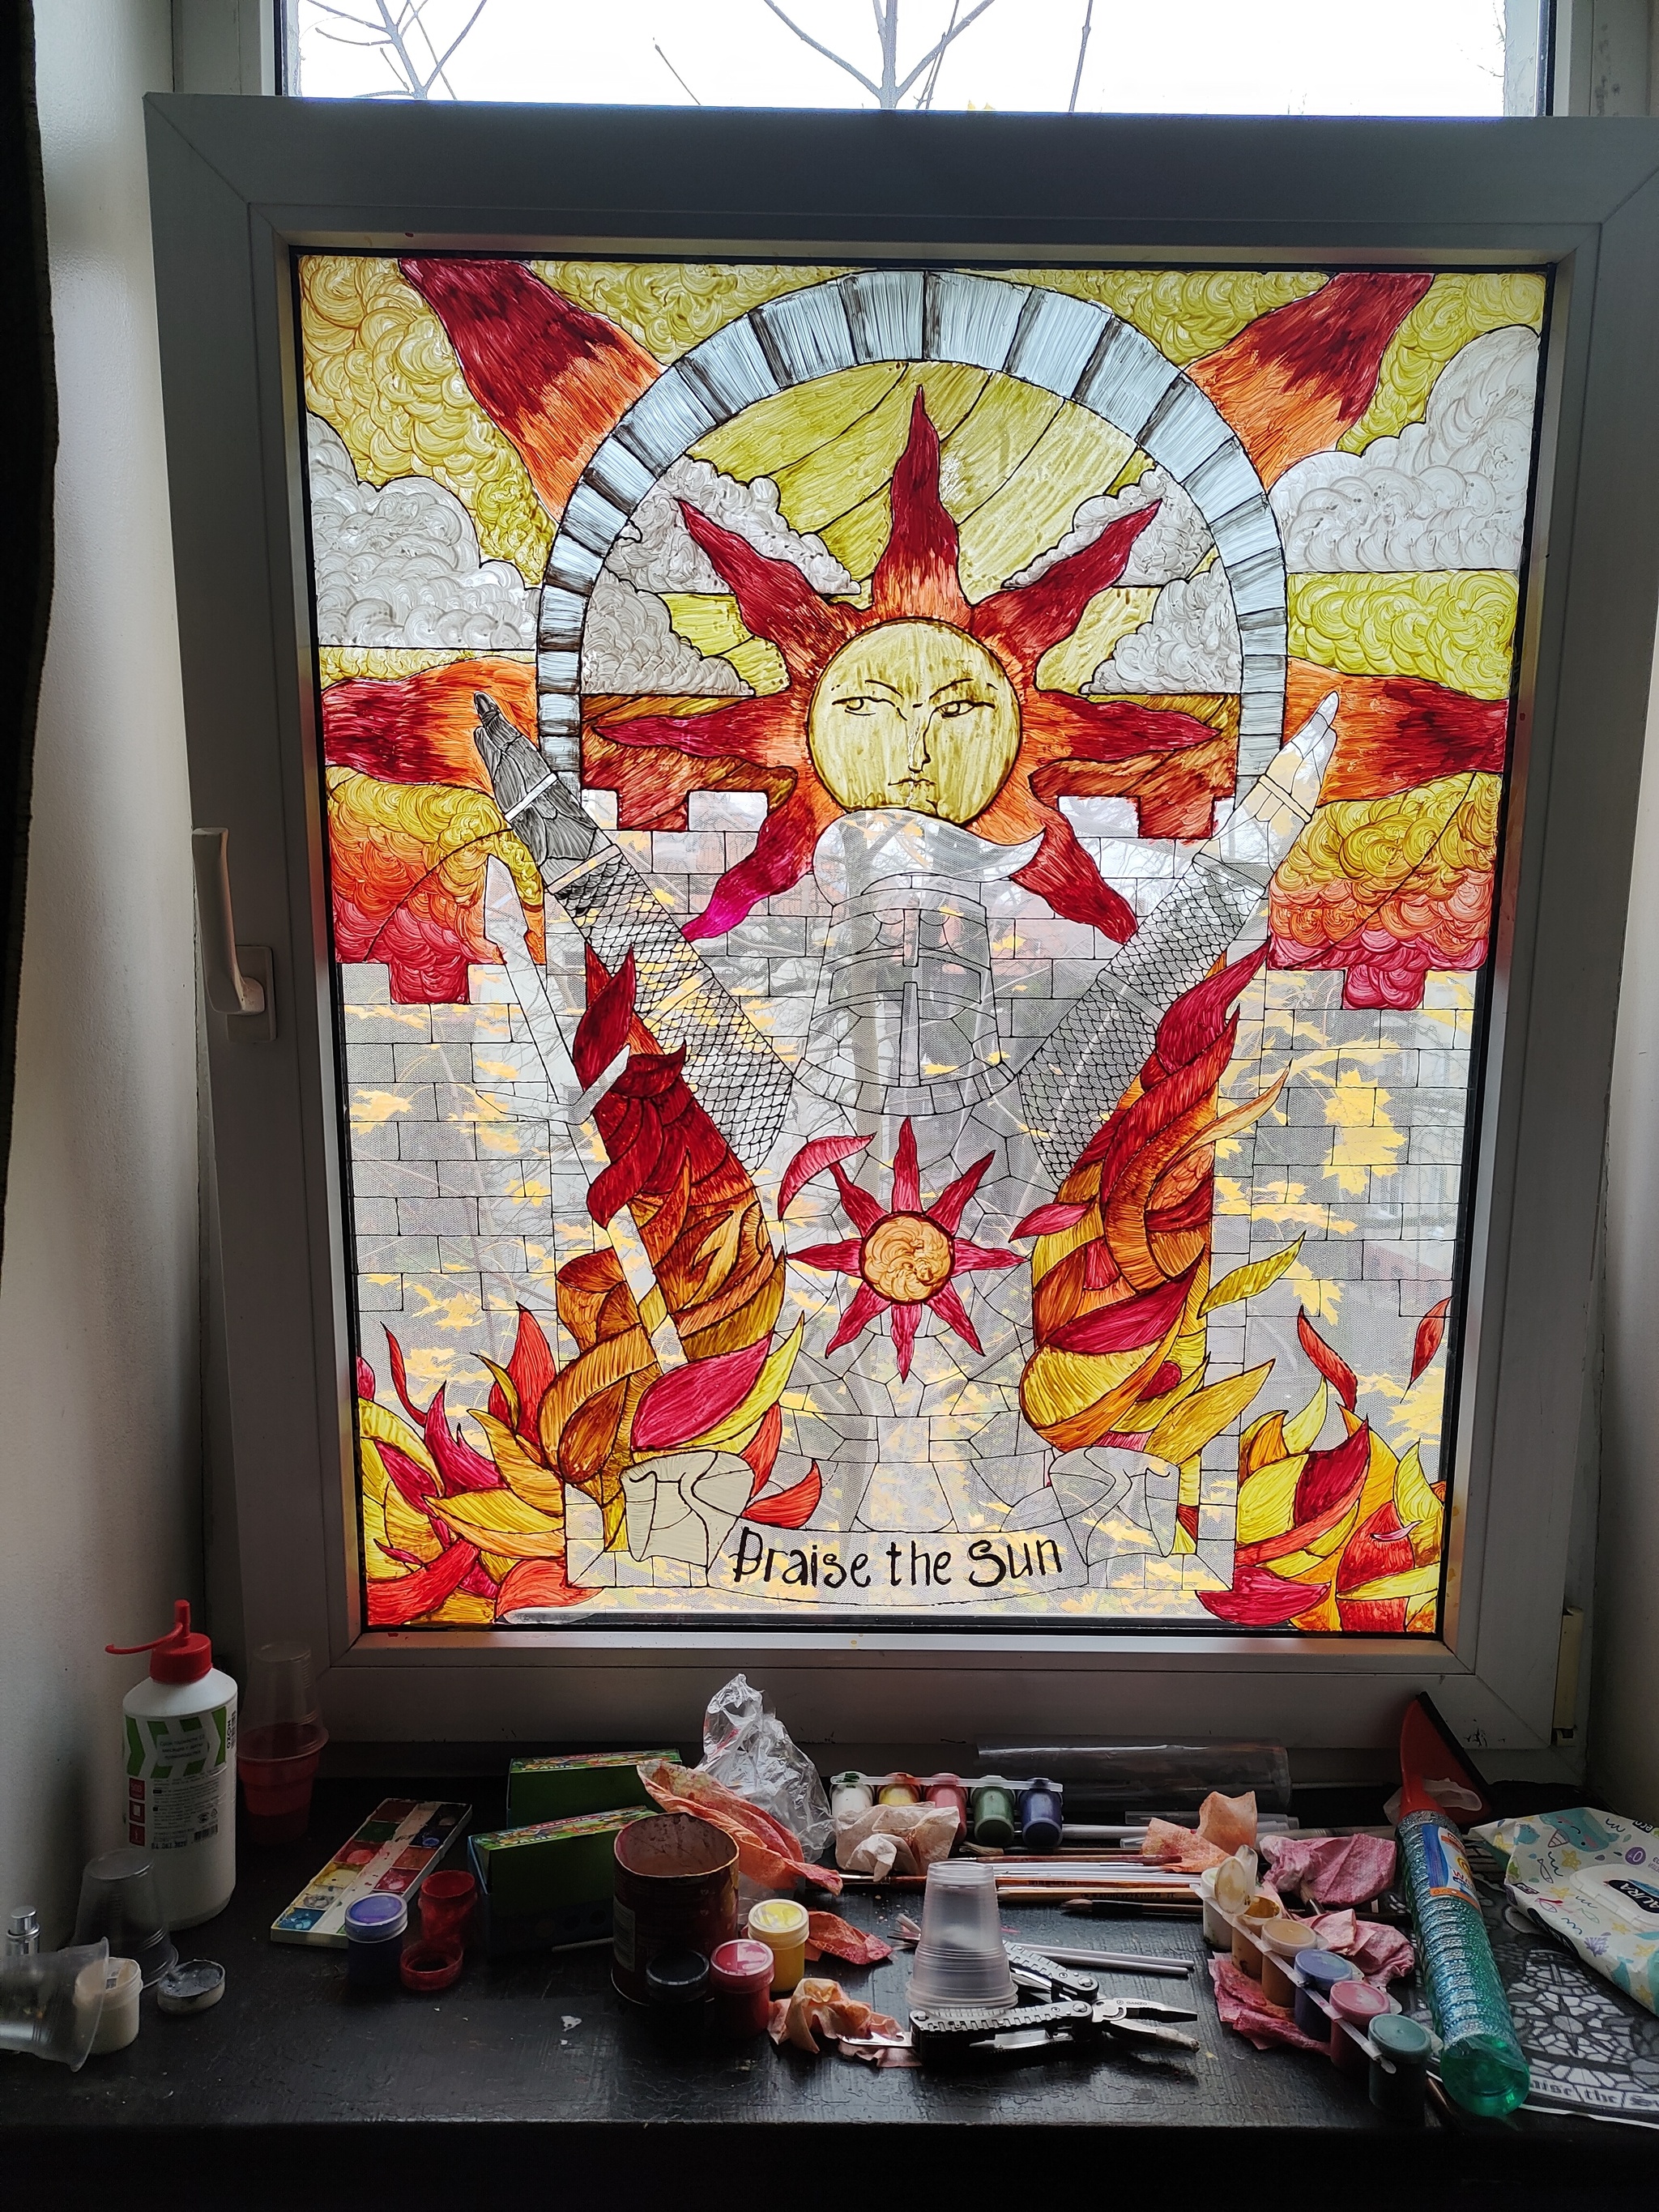 Praise the sun! (almost stained glass) - My, Needlework without process, Stained glass, Praise the sun, Longpost